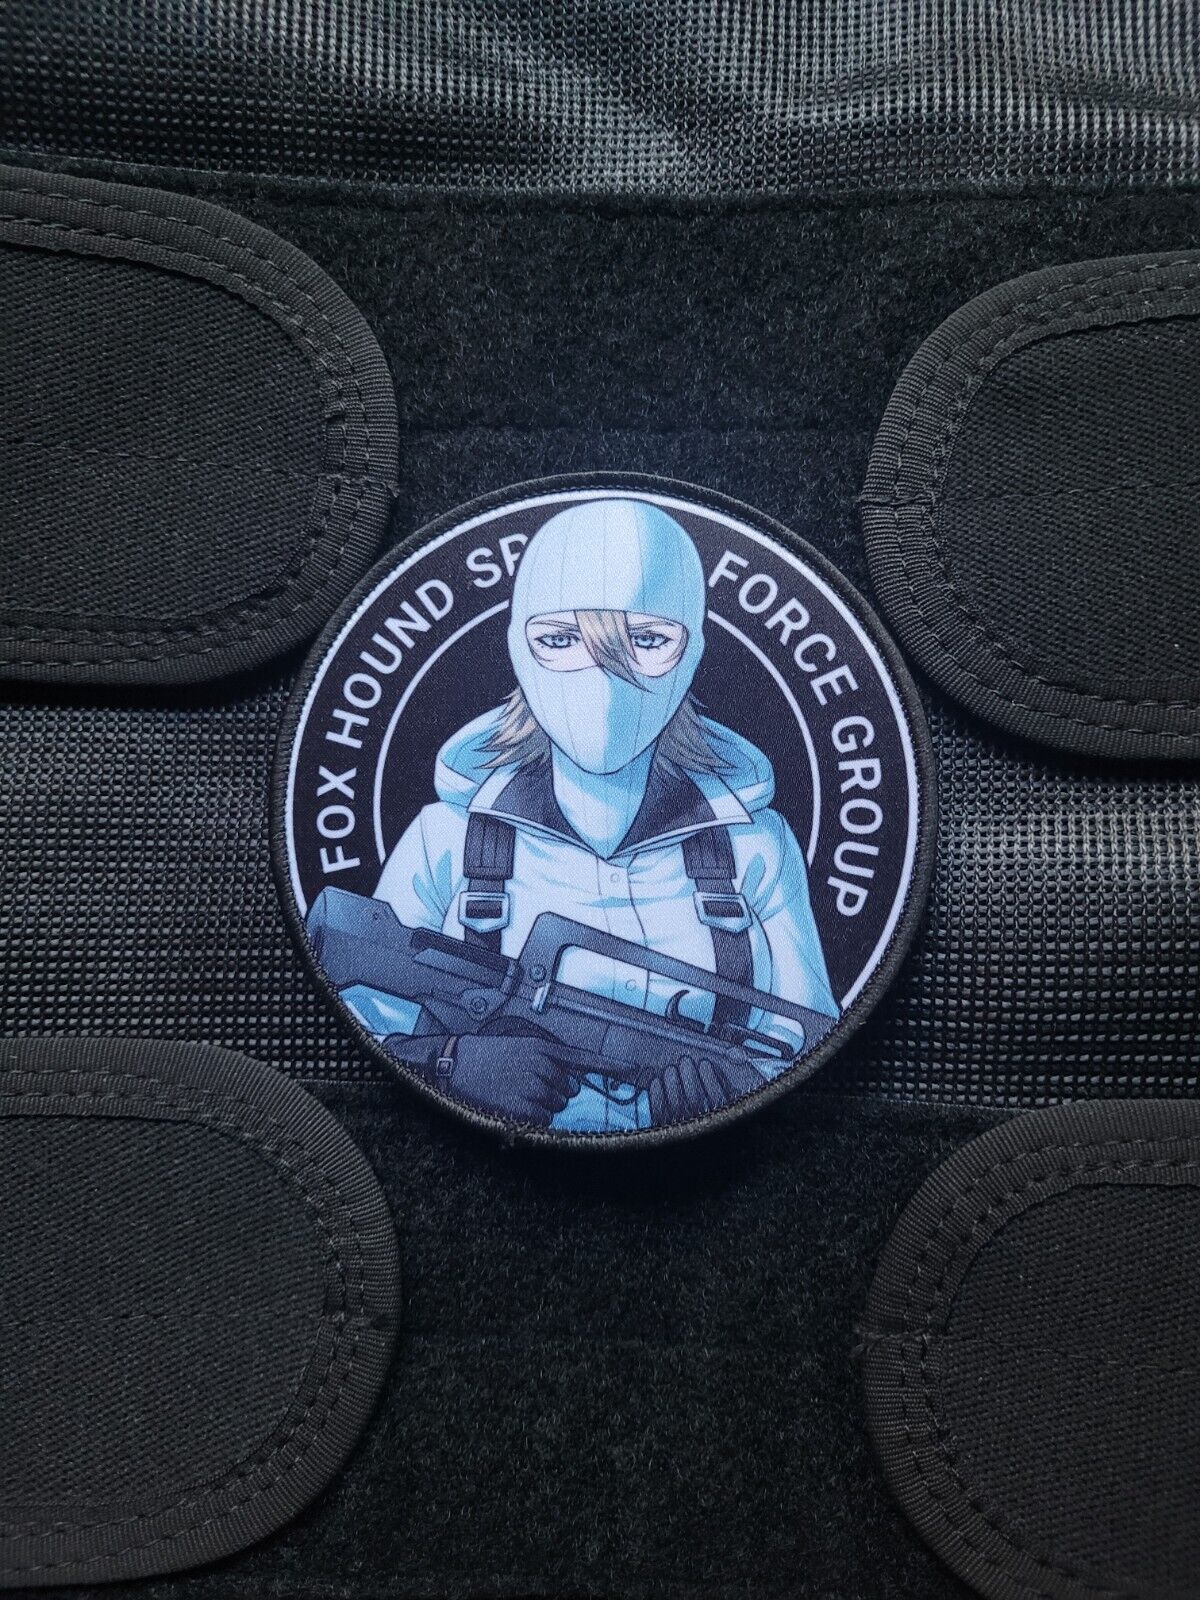 Metal Gear Solid Genome Soldier female anime girl airsoft morale military patch